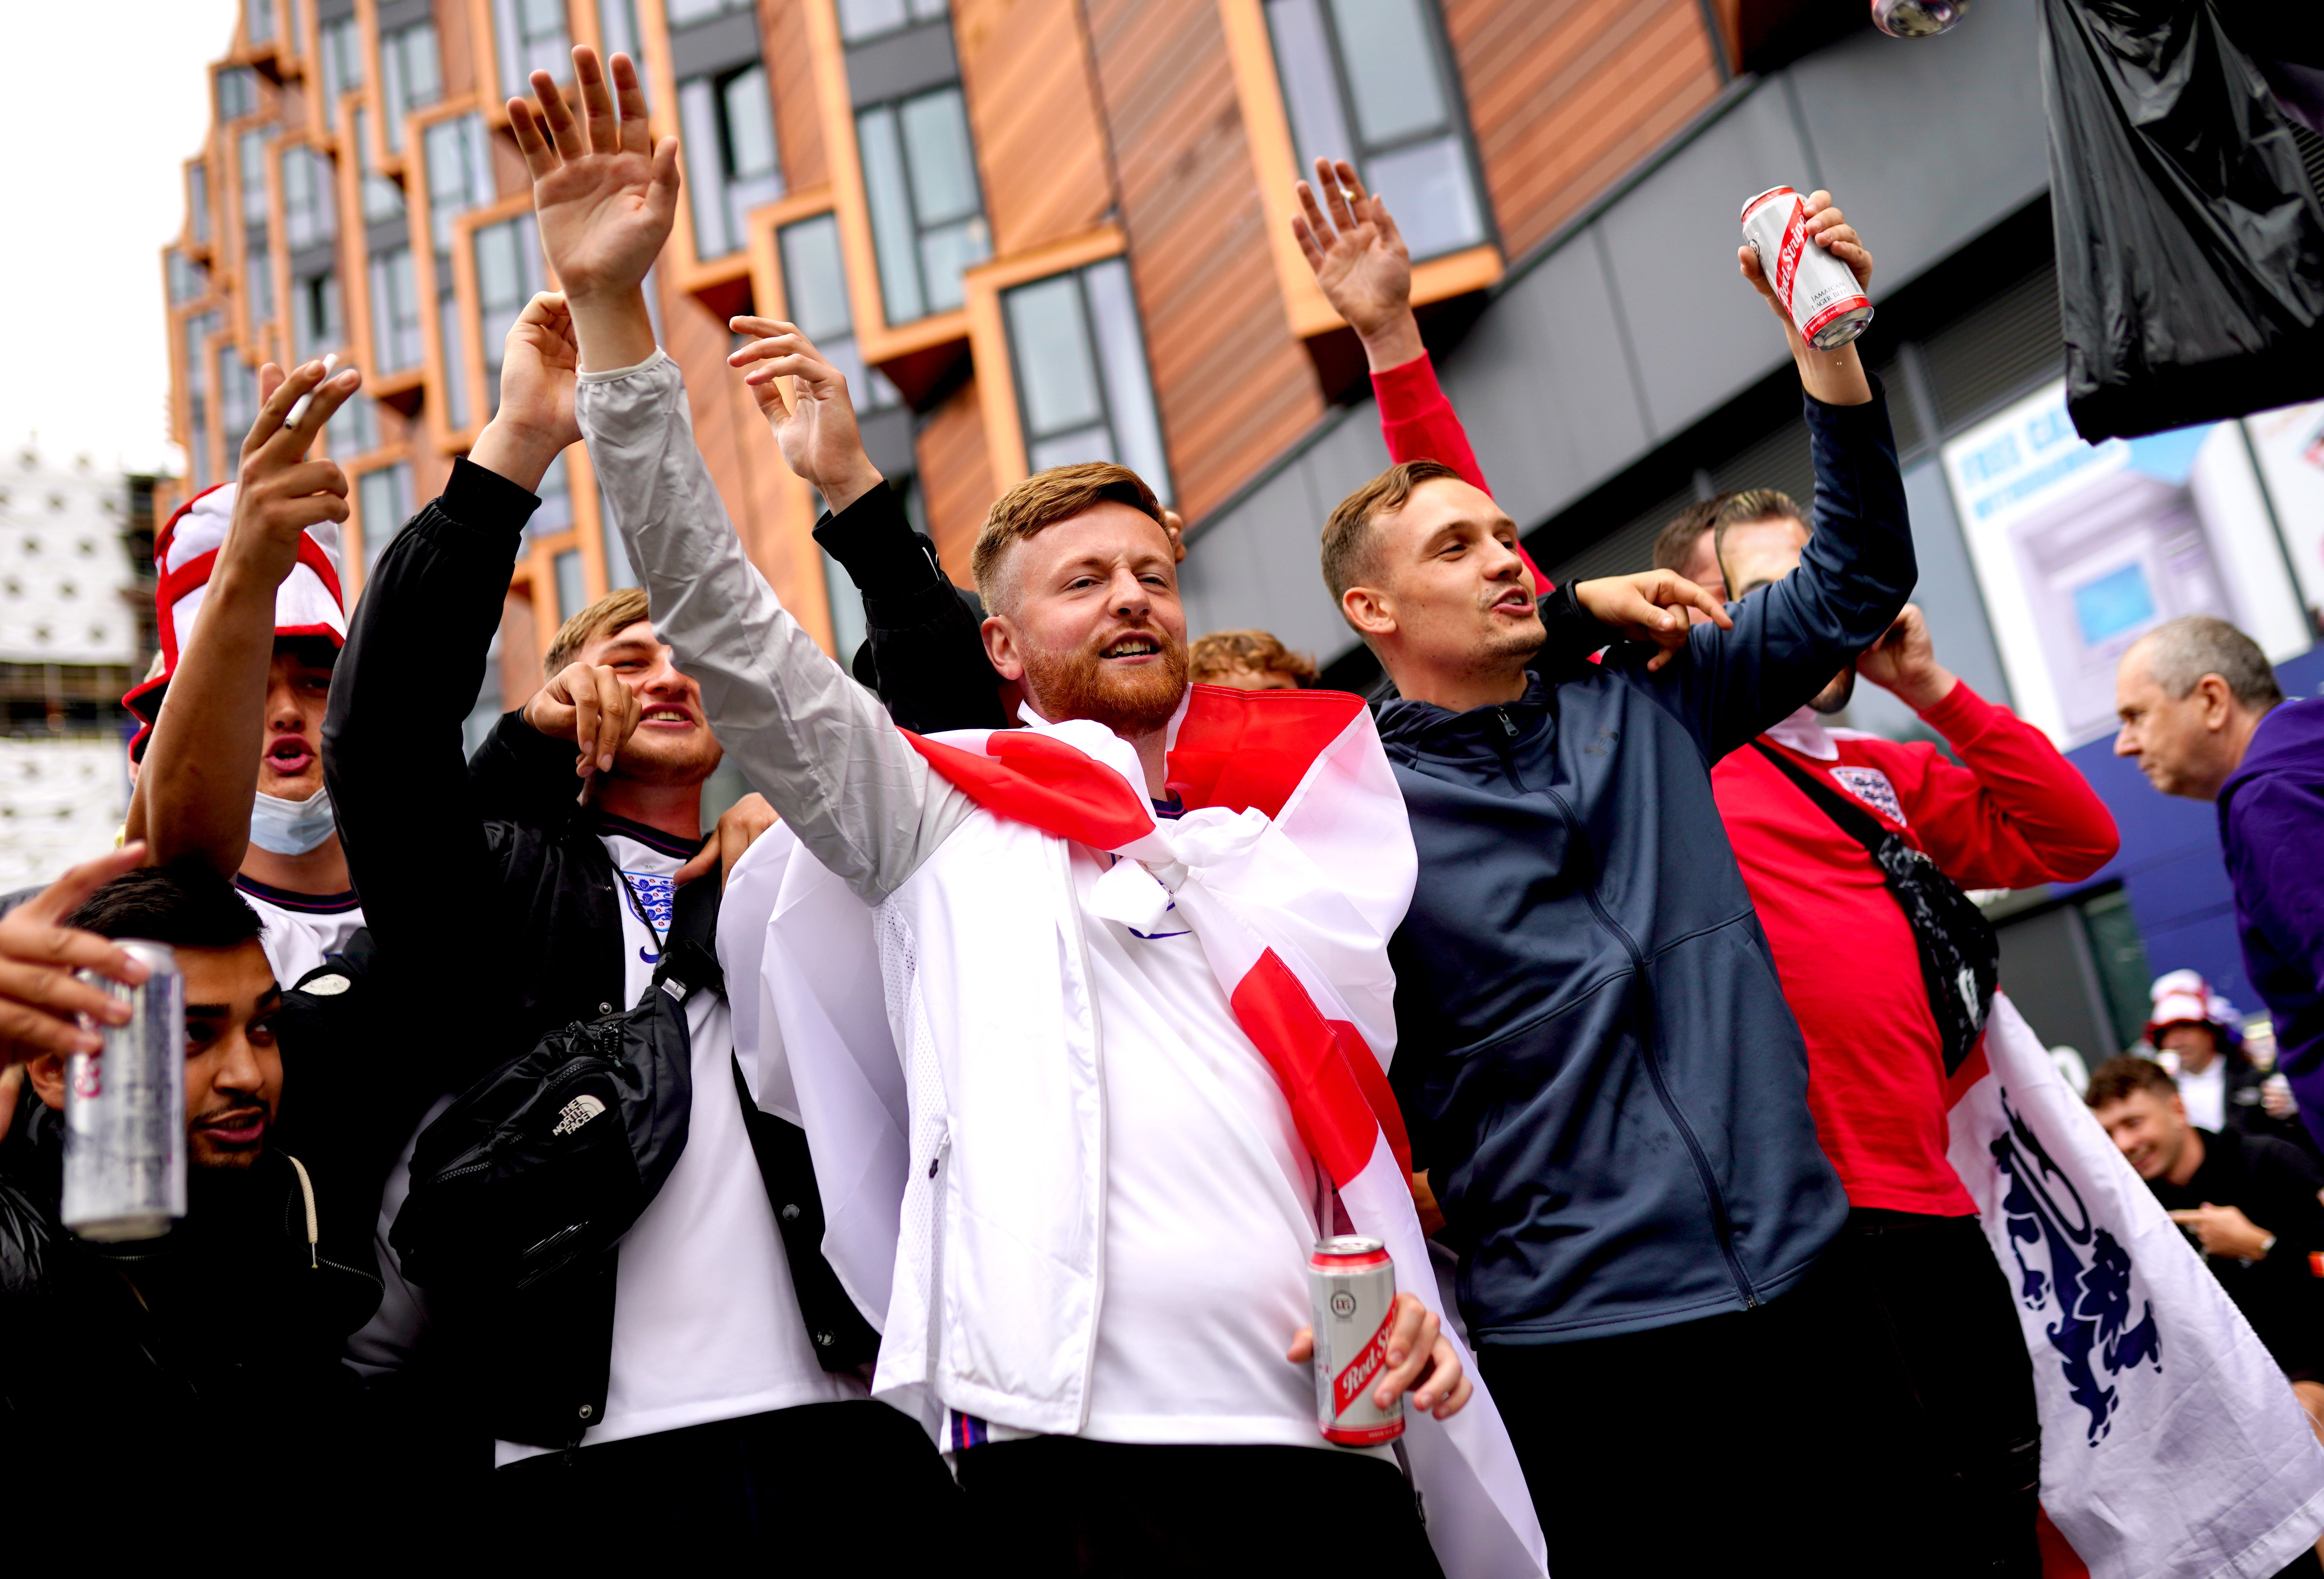 England fans arrive at Wembley Stadium ahead of the UEFA Euro 2020 Group D match between England and Scotland